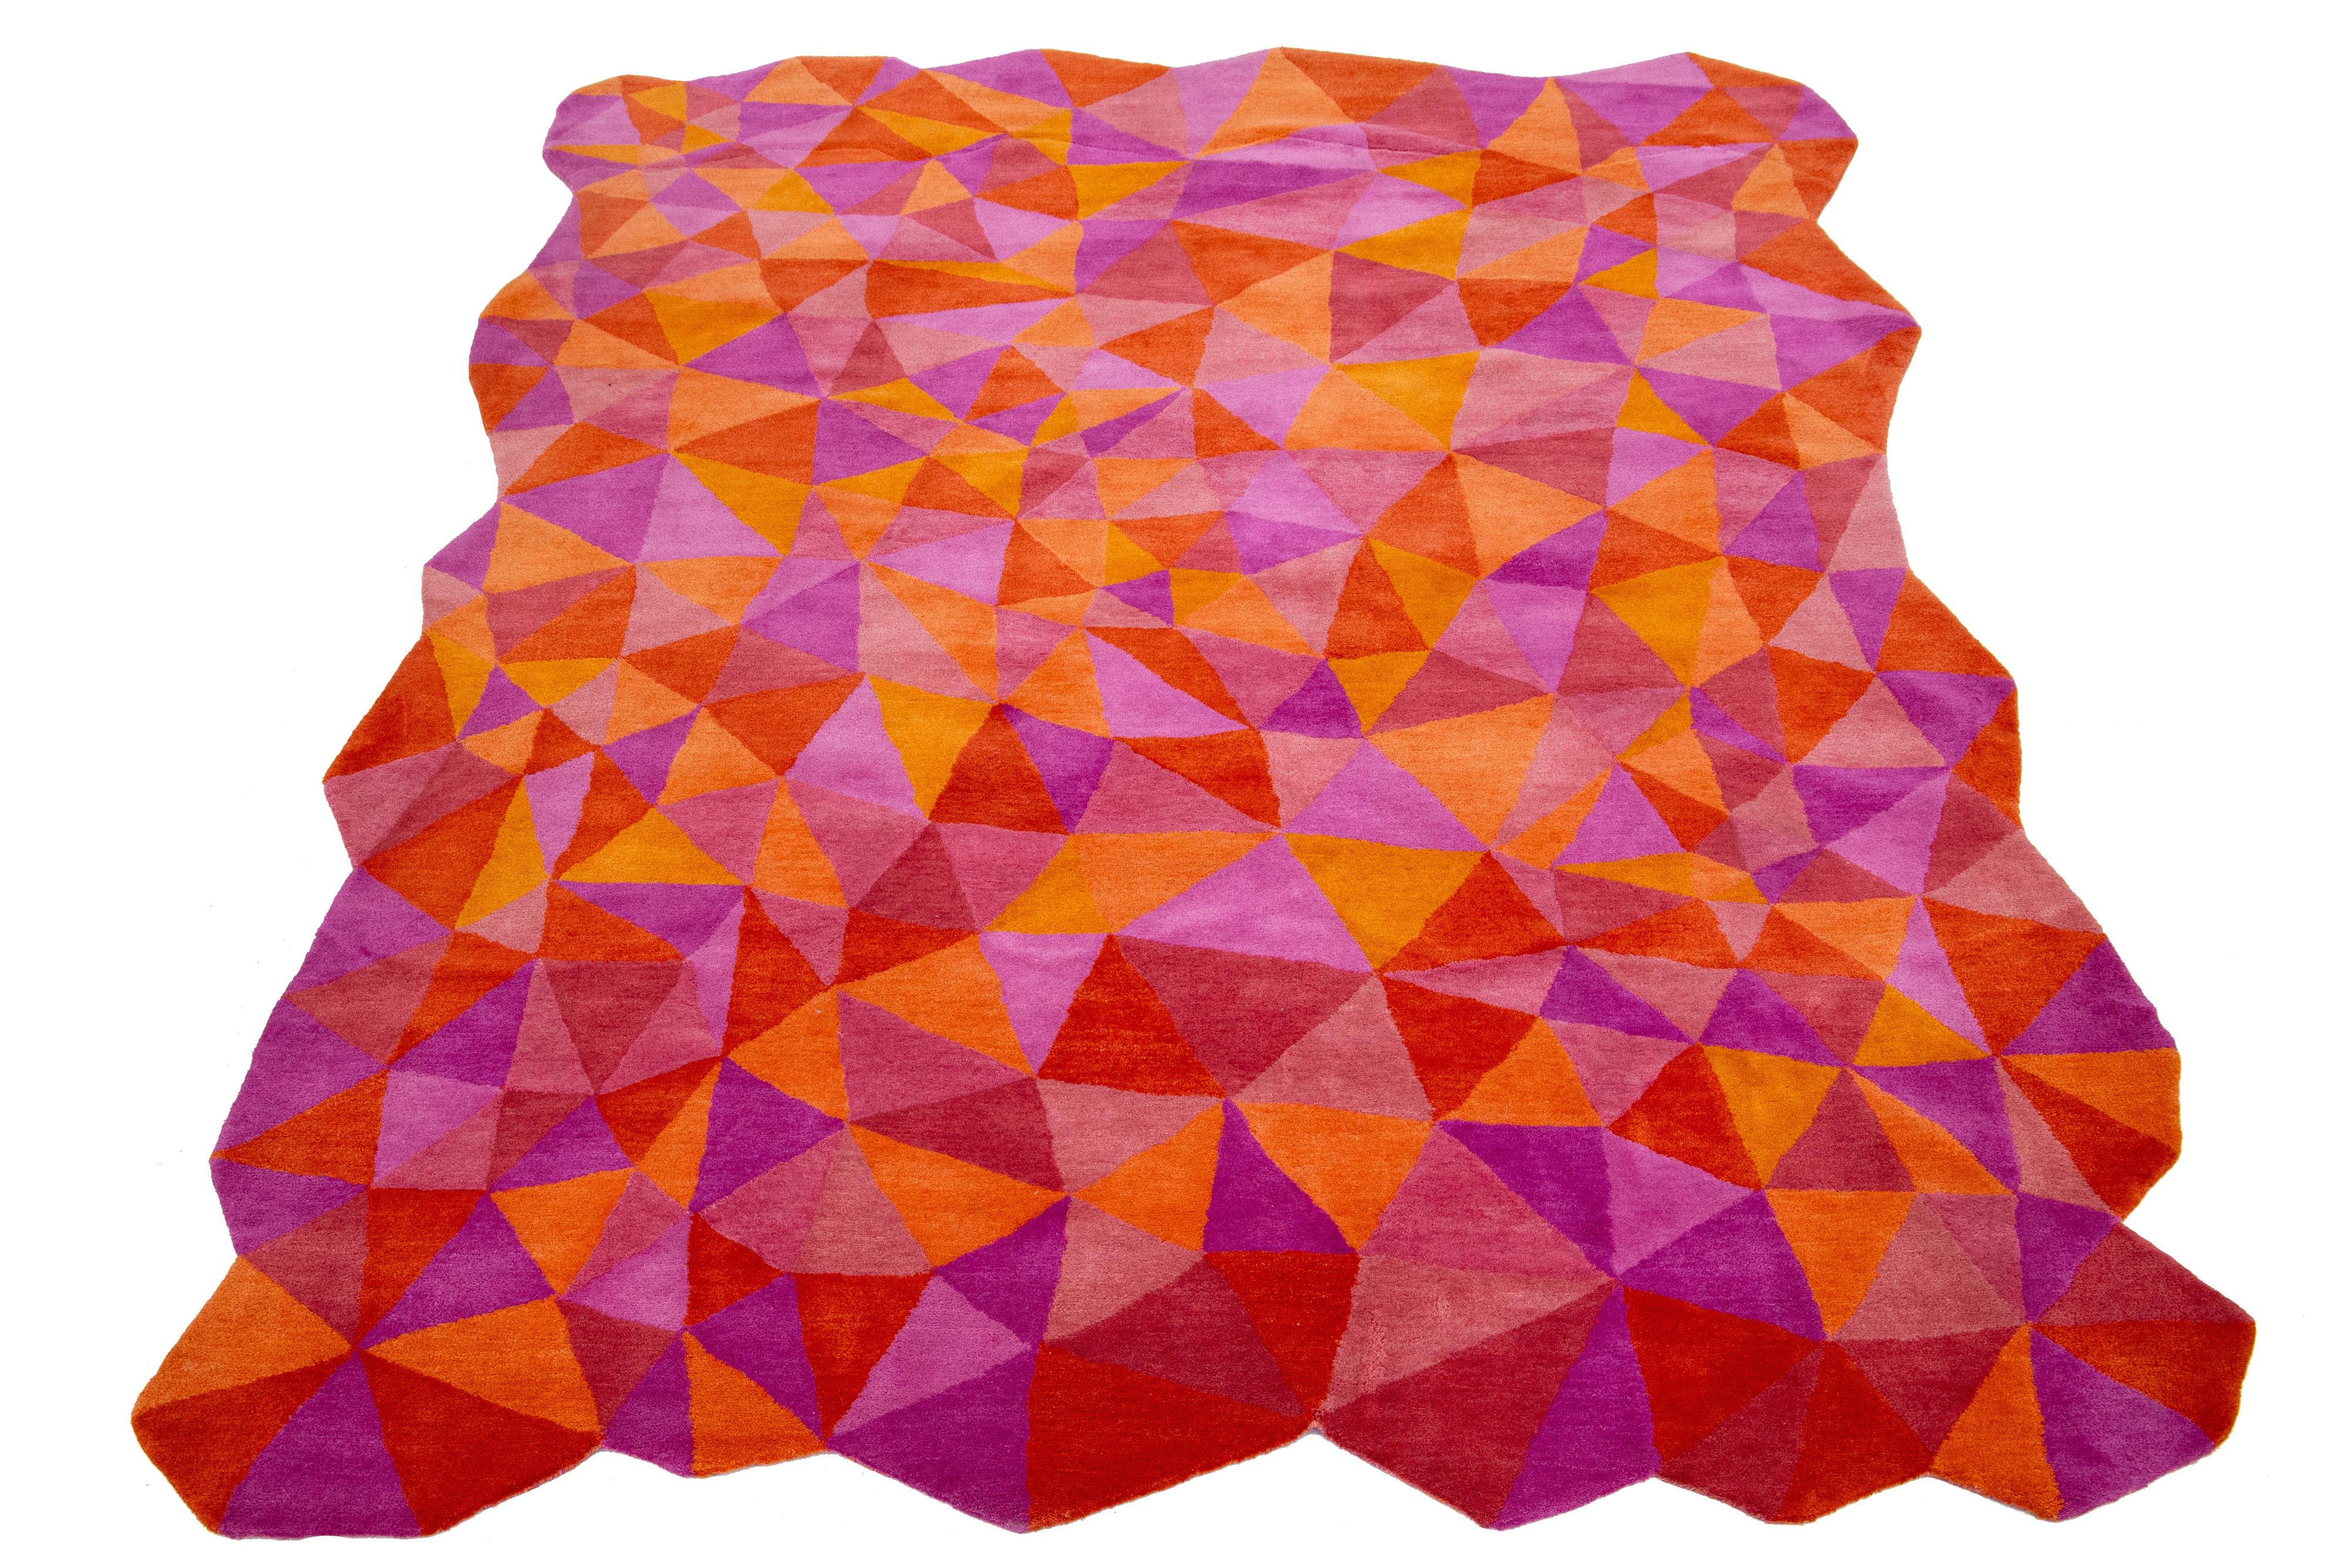 This beautiful, modern hand-tufted wool rug is part of our Laura Gottwald for Apadana Collection and features orange, purple, pink, and red fields. This Fantasia design: Our only non-repeating design is an exuberant arrangement of asymmetrical